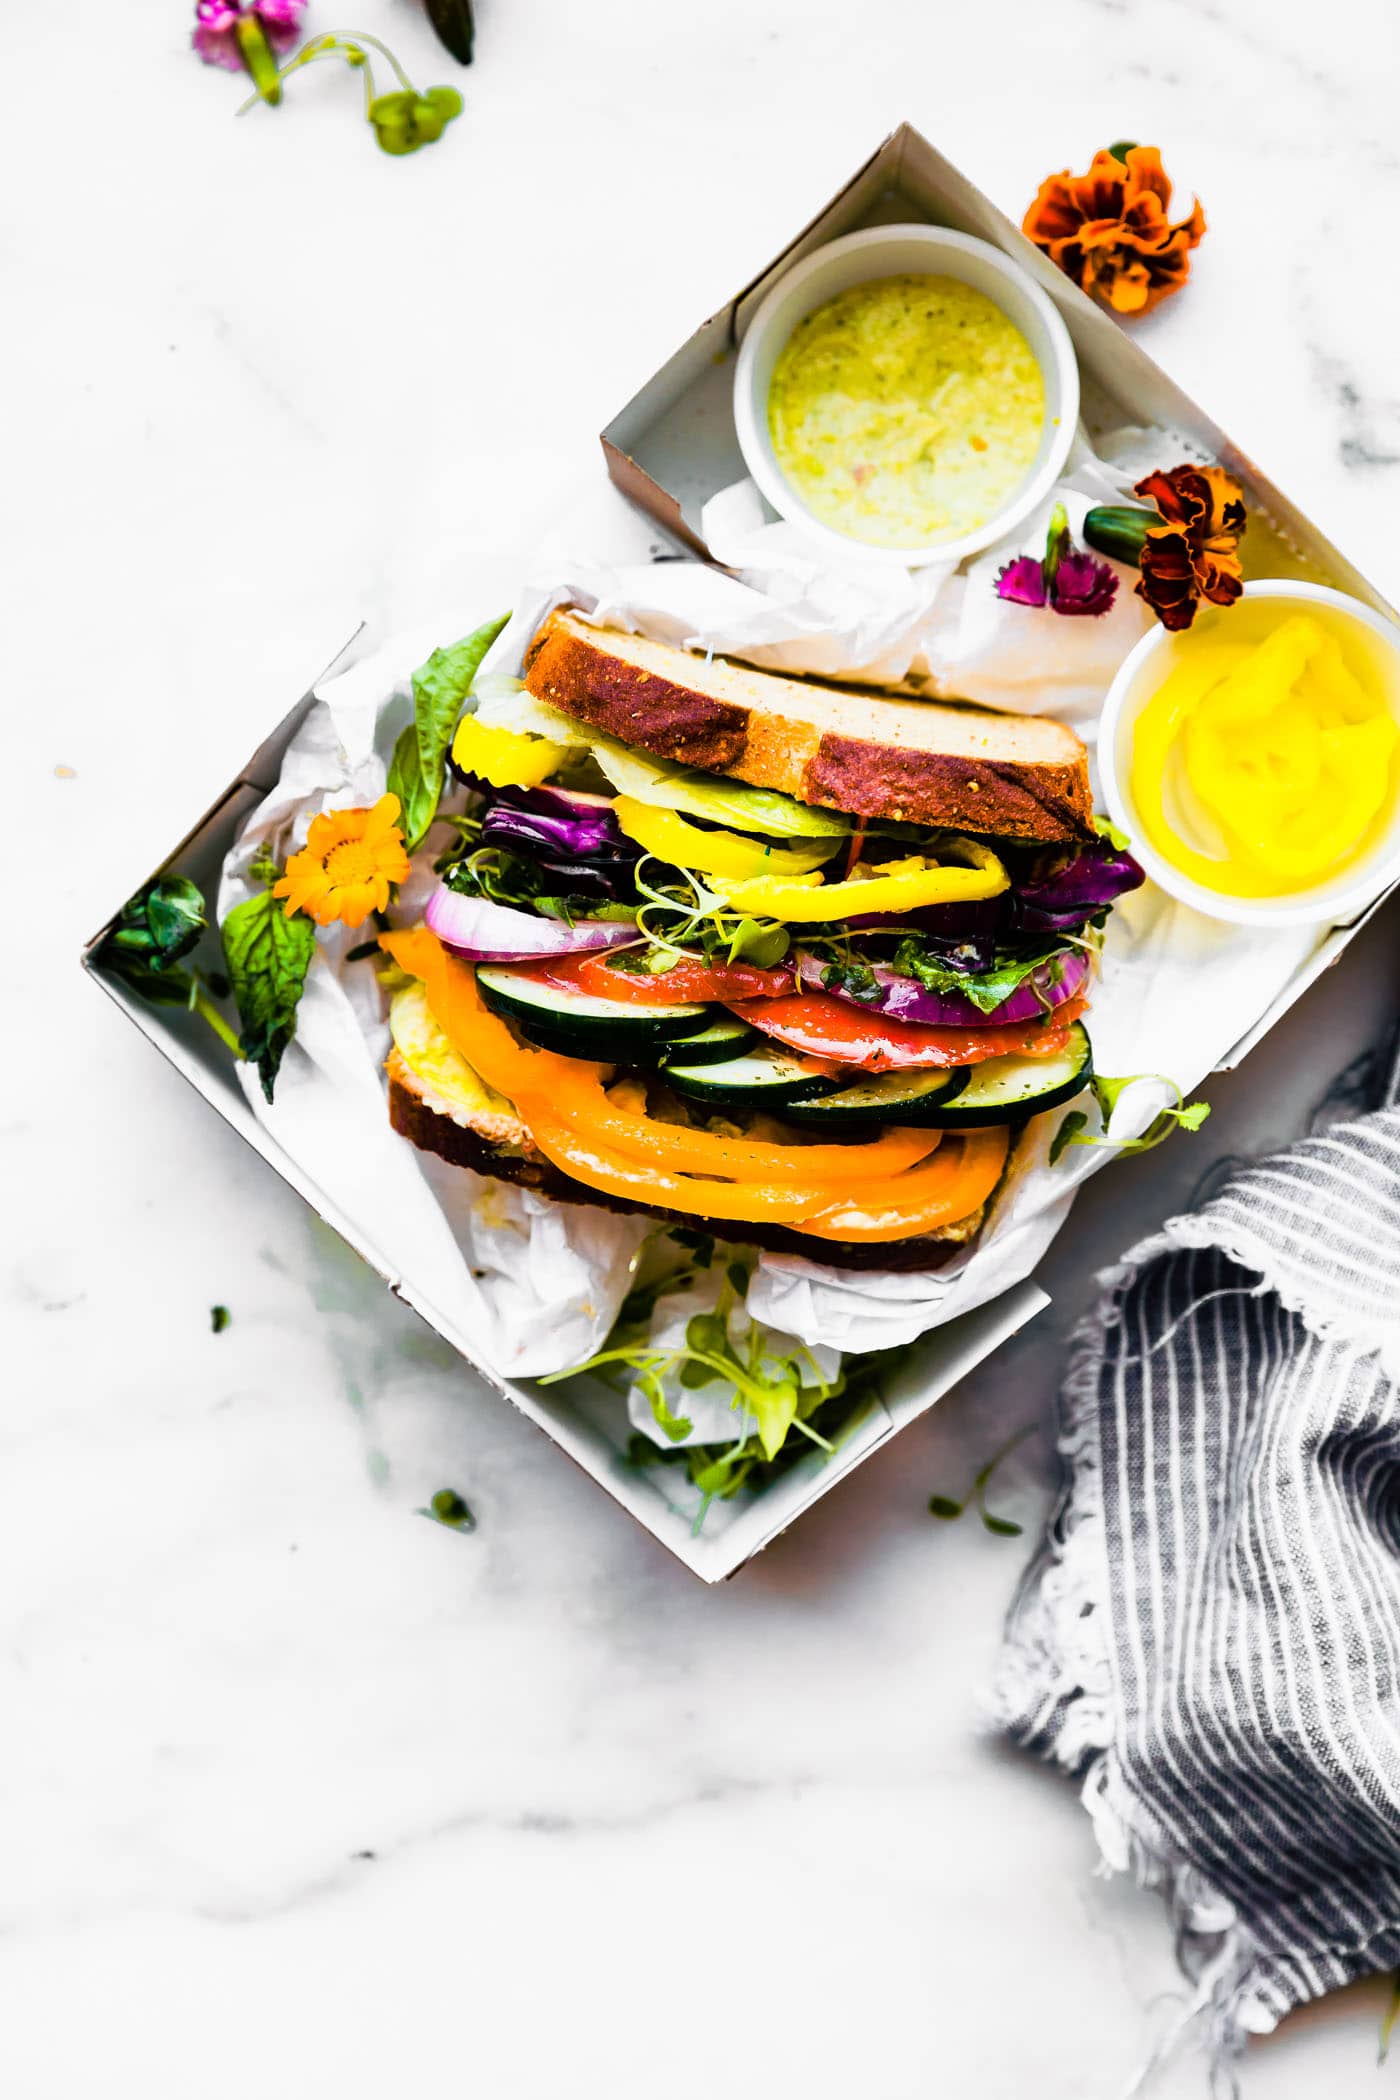 Overhead view lunch box with extra thick vegetable sandwich made with gluten free bread